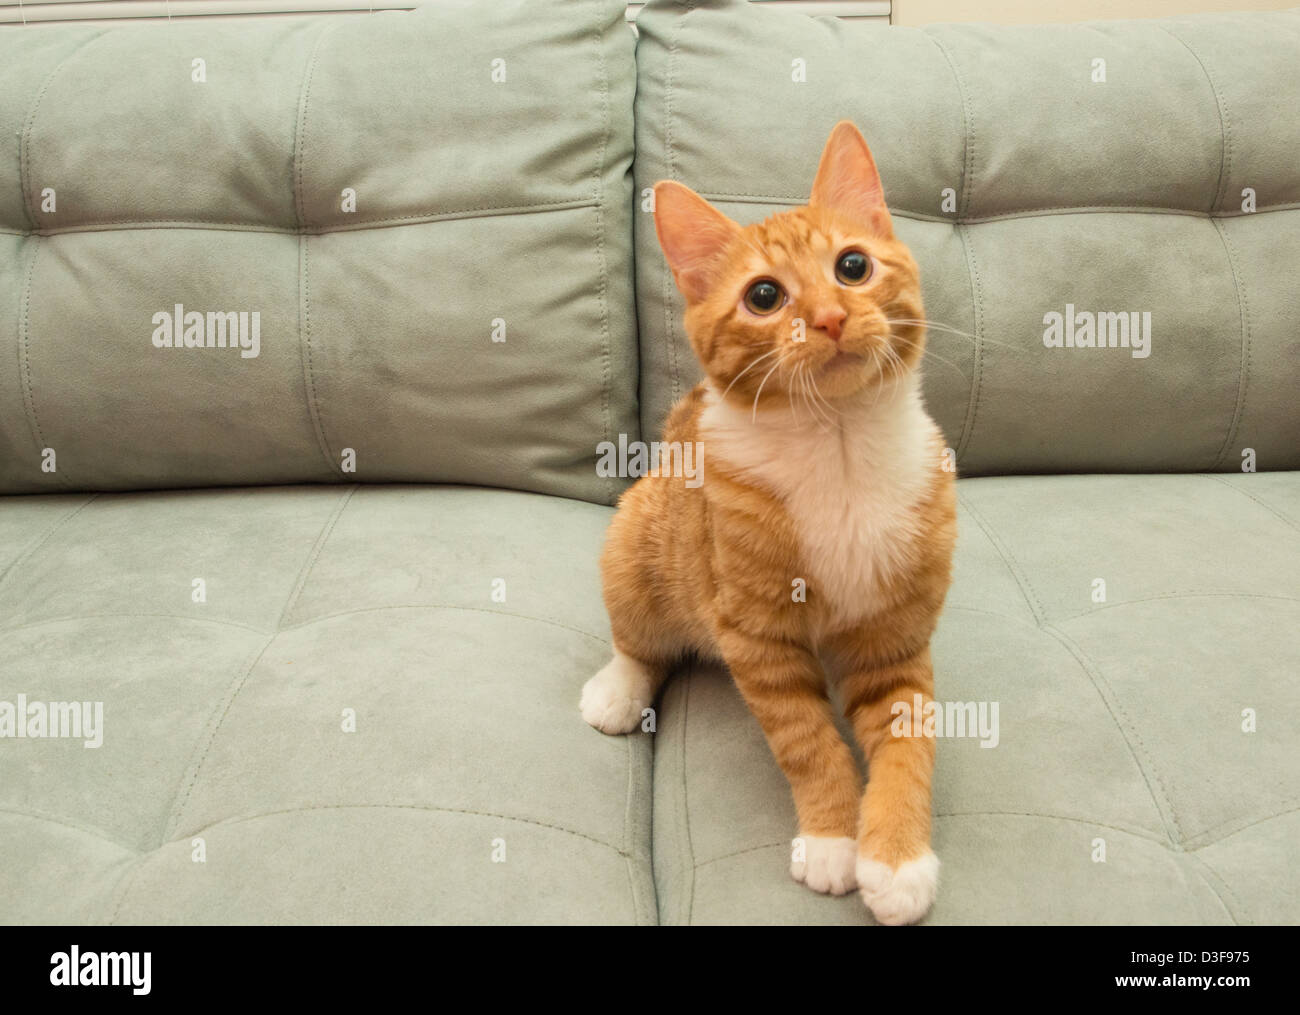 Young four month old orange tabby cat sitting on couch, waiting to play Stock Photo